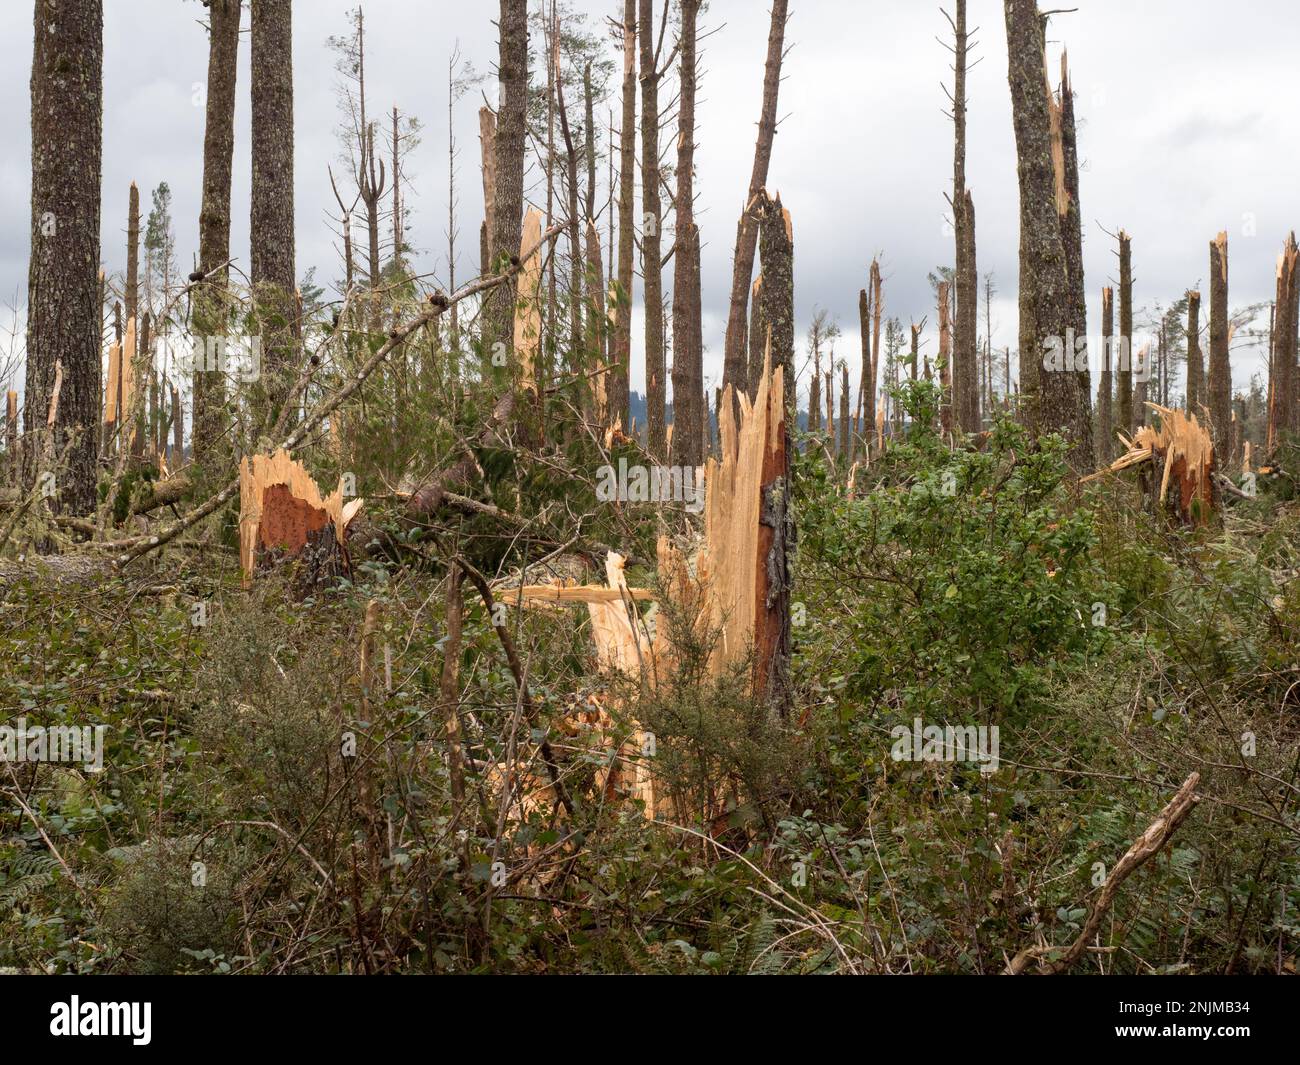 View of a pine forest after storm cyclone Gabrielle.Almost every tree has been snapped by severe high winds.Apocalyptic scene. Stock Photo